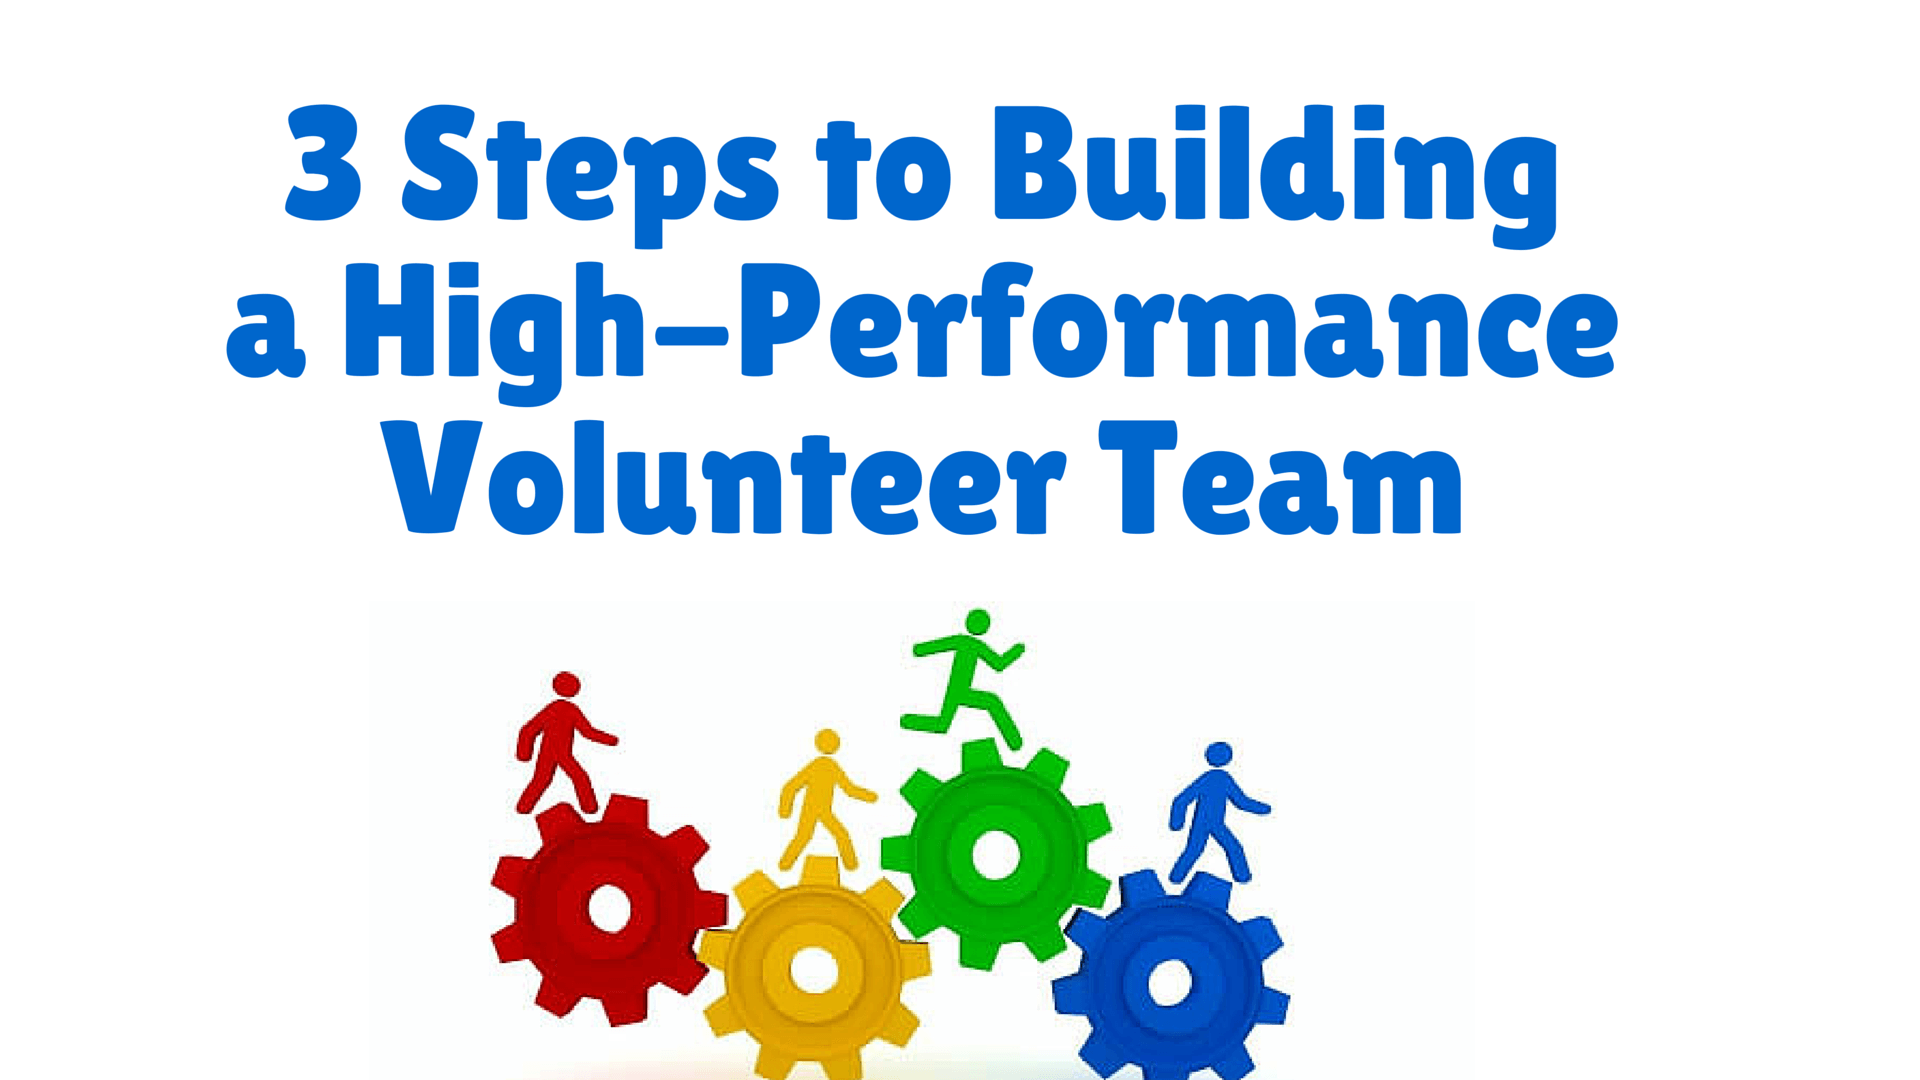 3 Steps to Building a High-Performance Volunteer Team